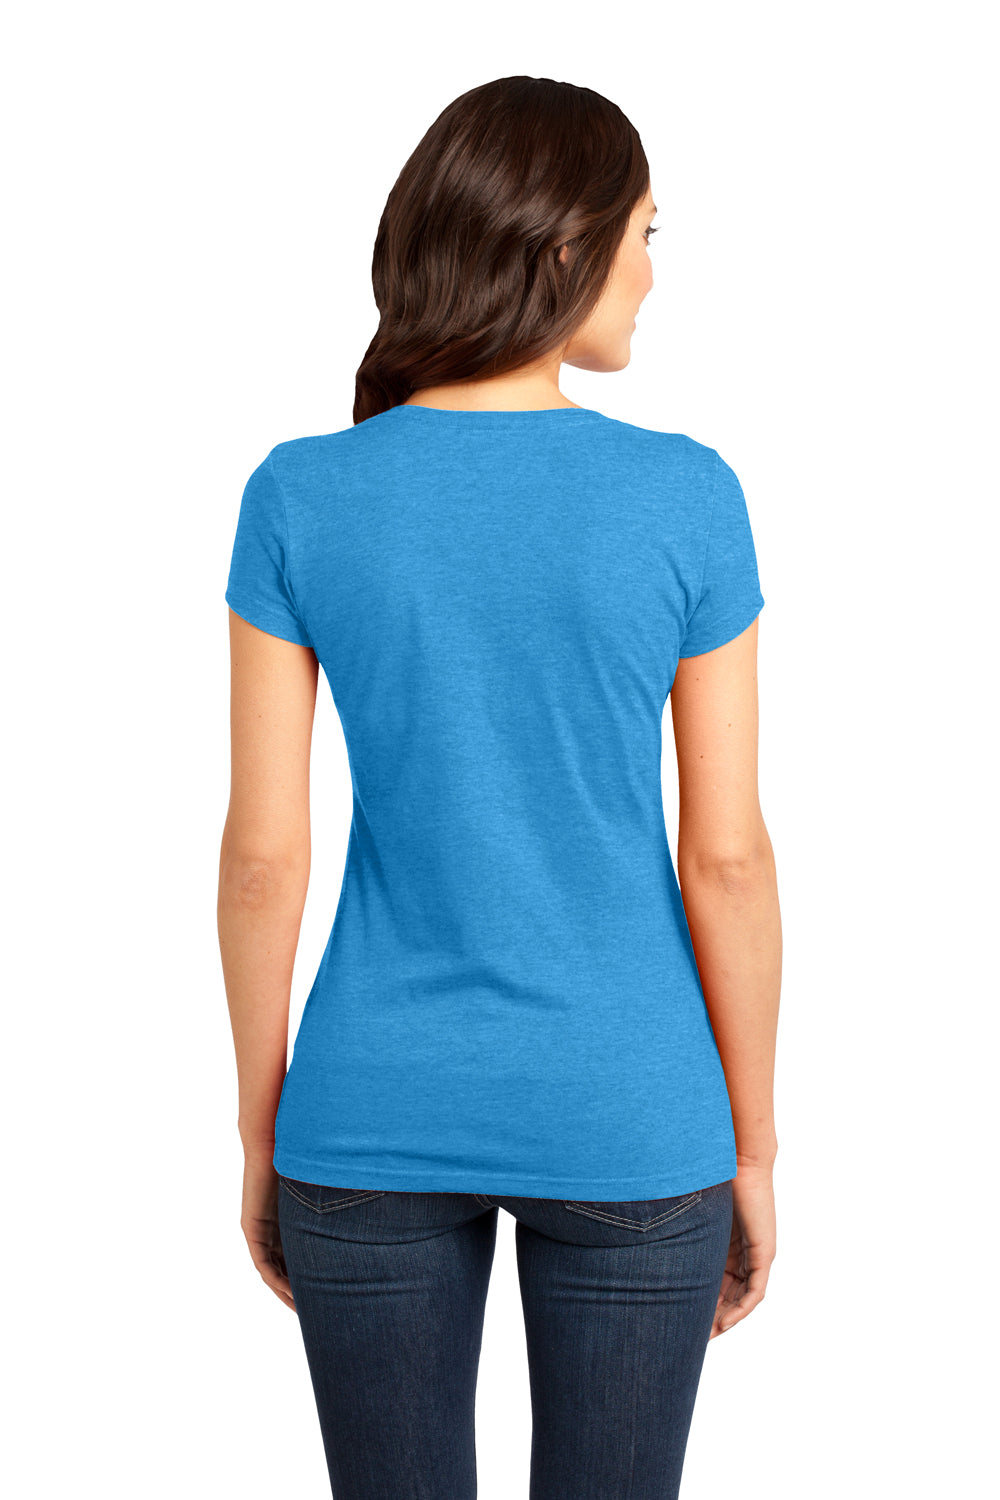 District DT6001 Womens Very Important Short Sleeve Crewneck T-Shirt Heather Turquoise Blue Back